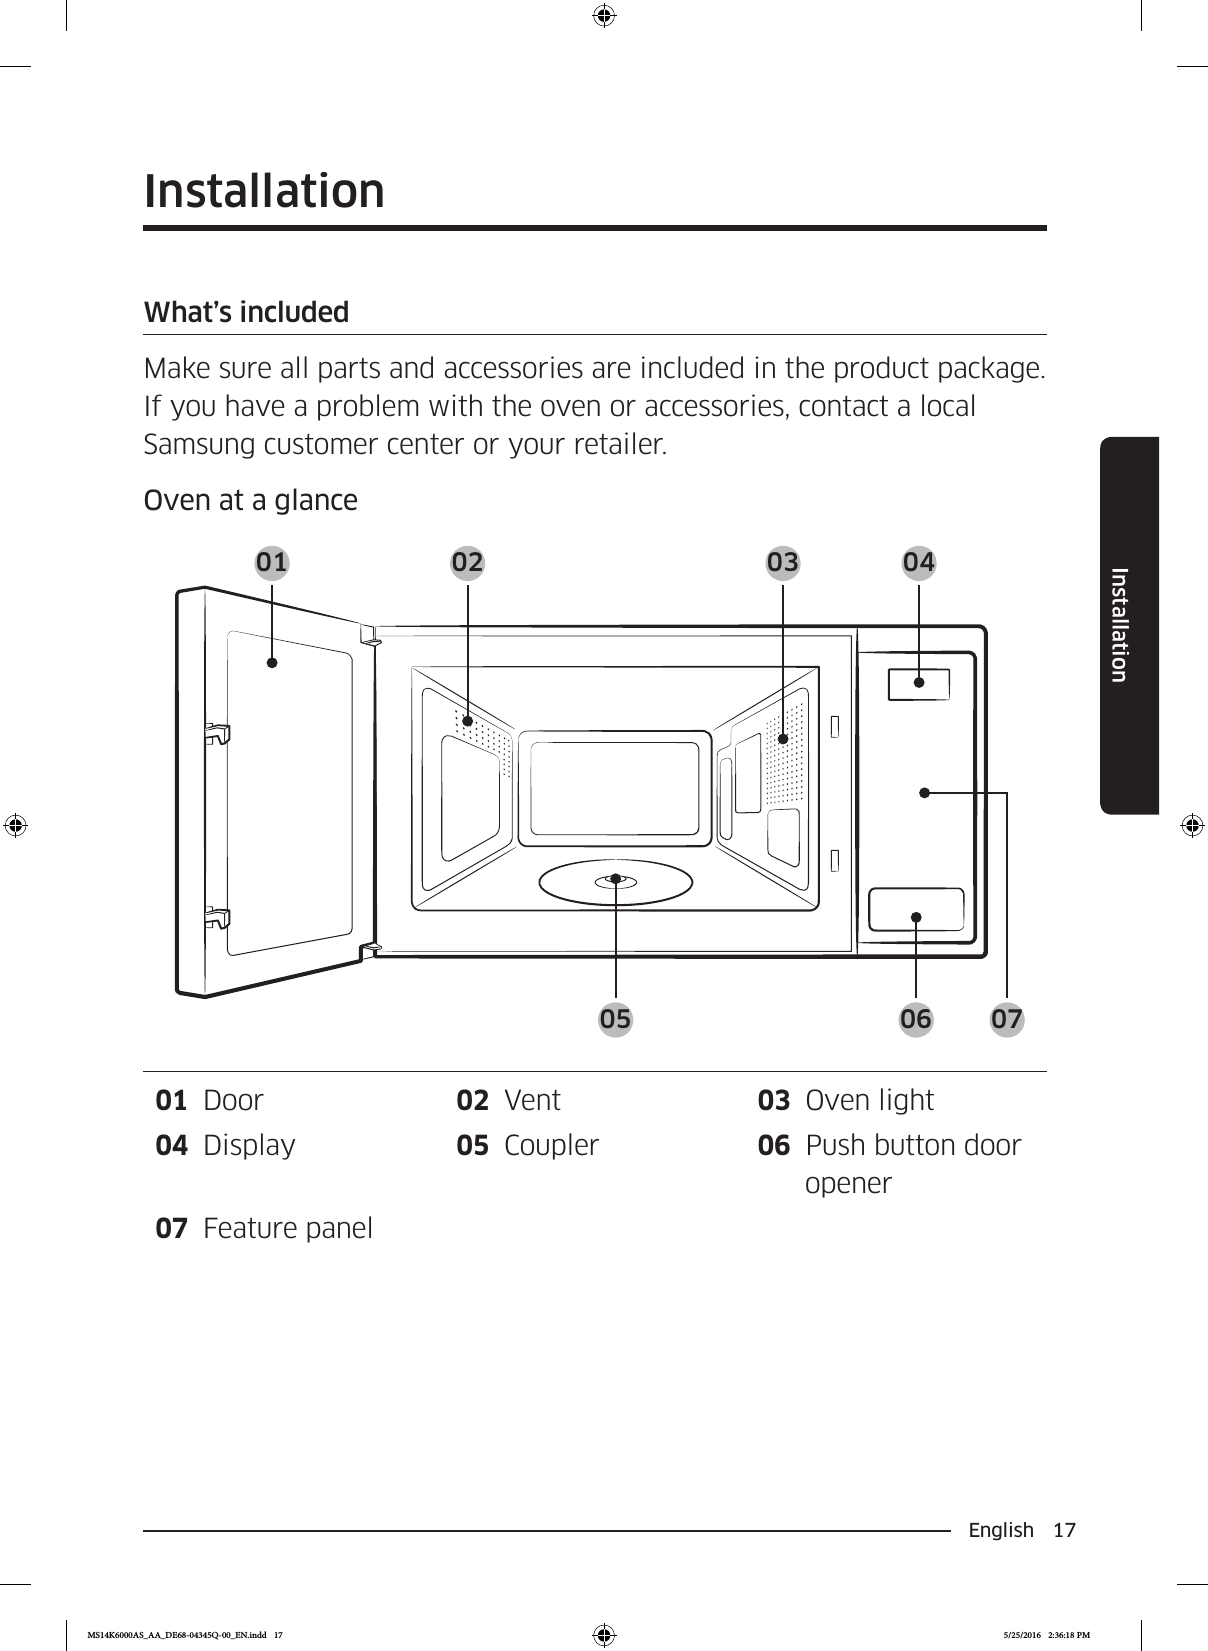 English 17InstallationInstallationWhat’s includedMake sure all parts and accessories are included in the product package. If you have a problem with the oven or accessories, contact a local Samsung customer center or your retailer.Oven at a glance01 02 03 0405 06 0701  Door 02  Vent 03  Oven light04  Display 05  Coupler 06  Push button door opener07  Feature panelMS14K6000AS_AA_DE68-04345Q-00_EN.indd   17 5/25/2016   2:36:18 PM